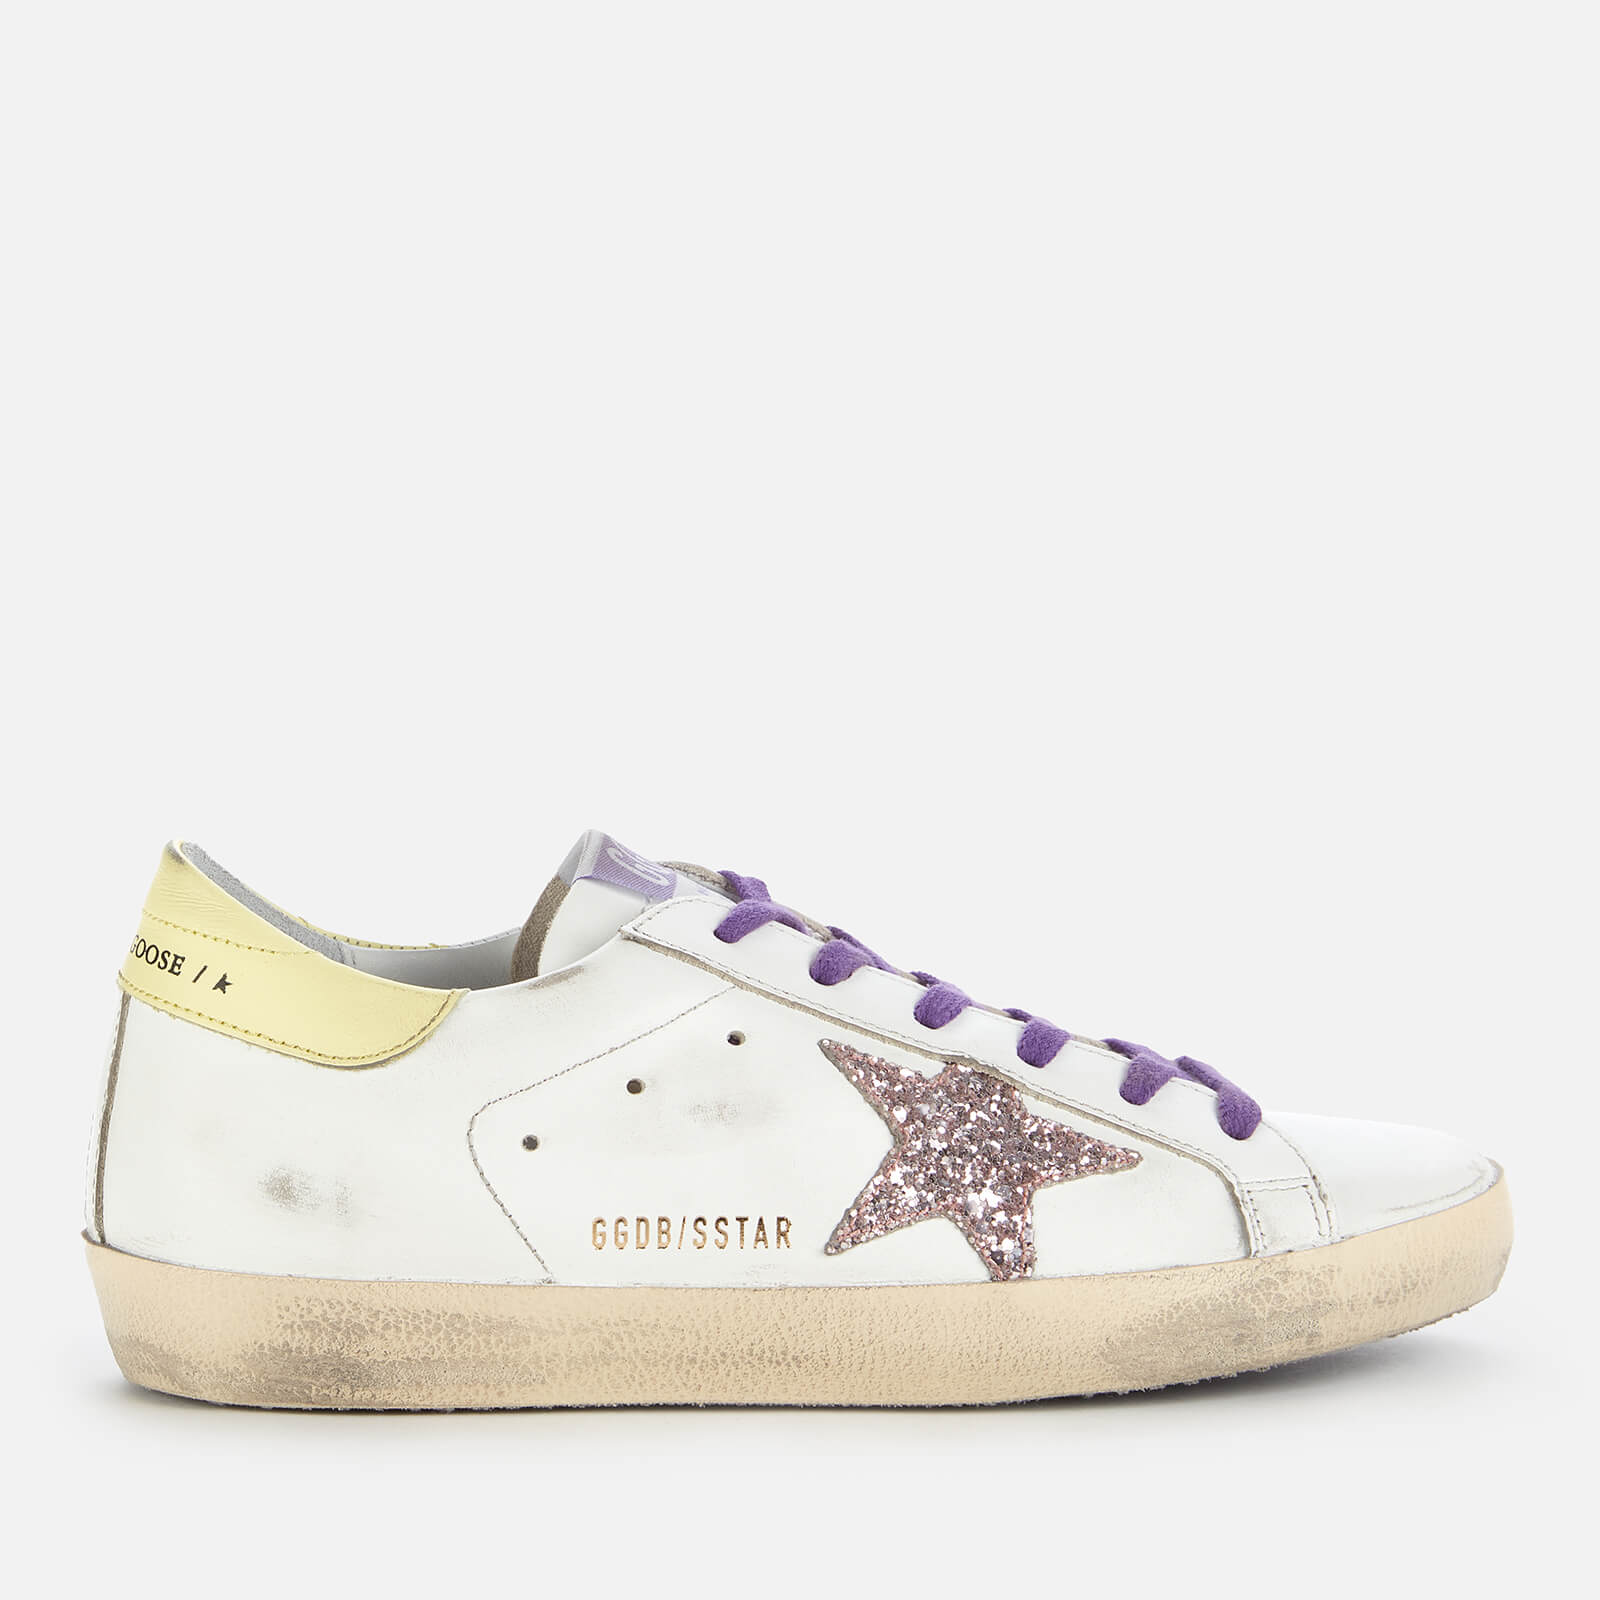 Golden Goose Deluxe Brand Women's Superstar Leather Trainers - White/Pink/Yellow - UK 7